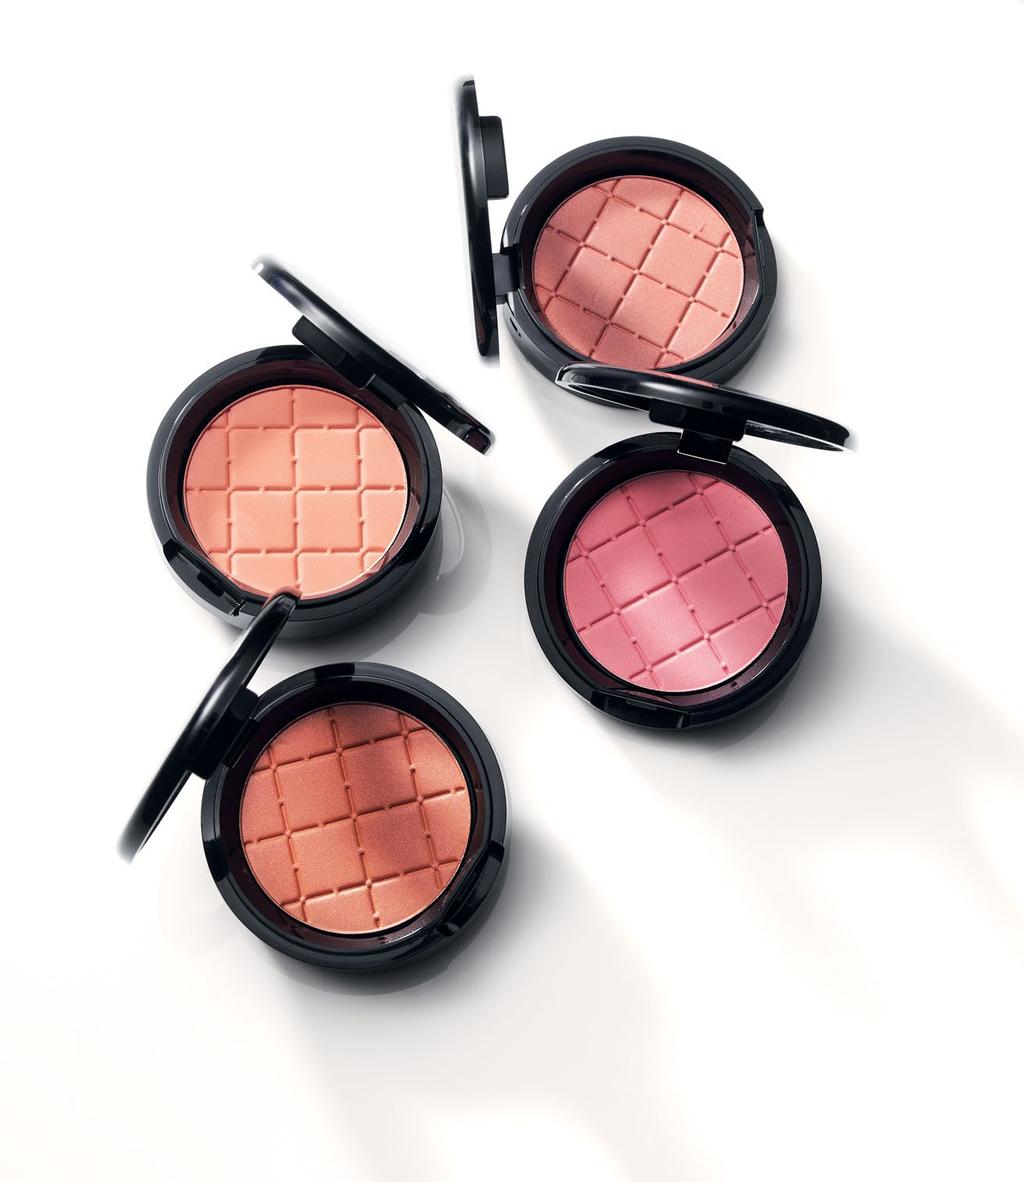 1 Fresh summer radiance BLUSH and glow A light and silky blush that sweeps on smoothly giving sheer colour and a radiant glow.